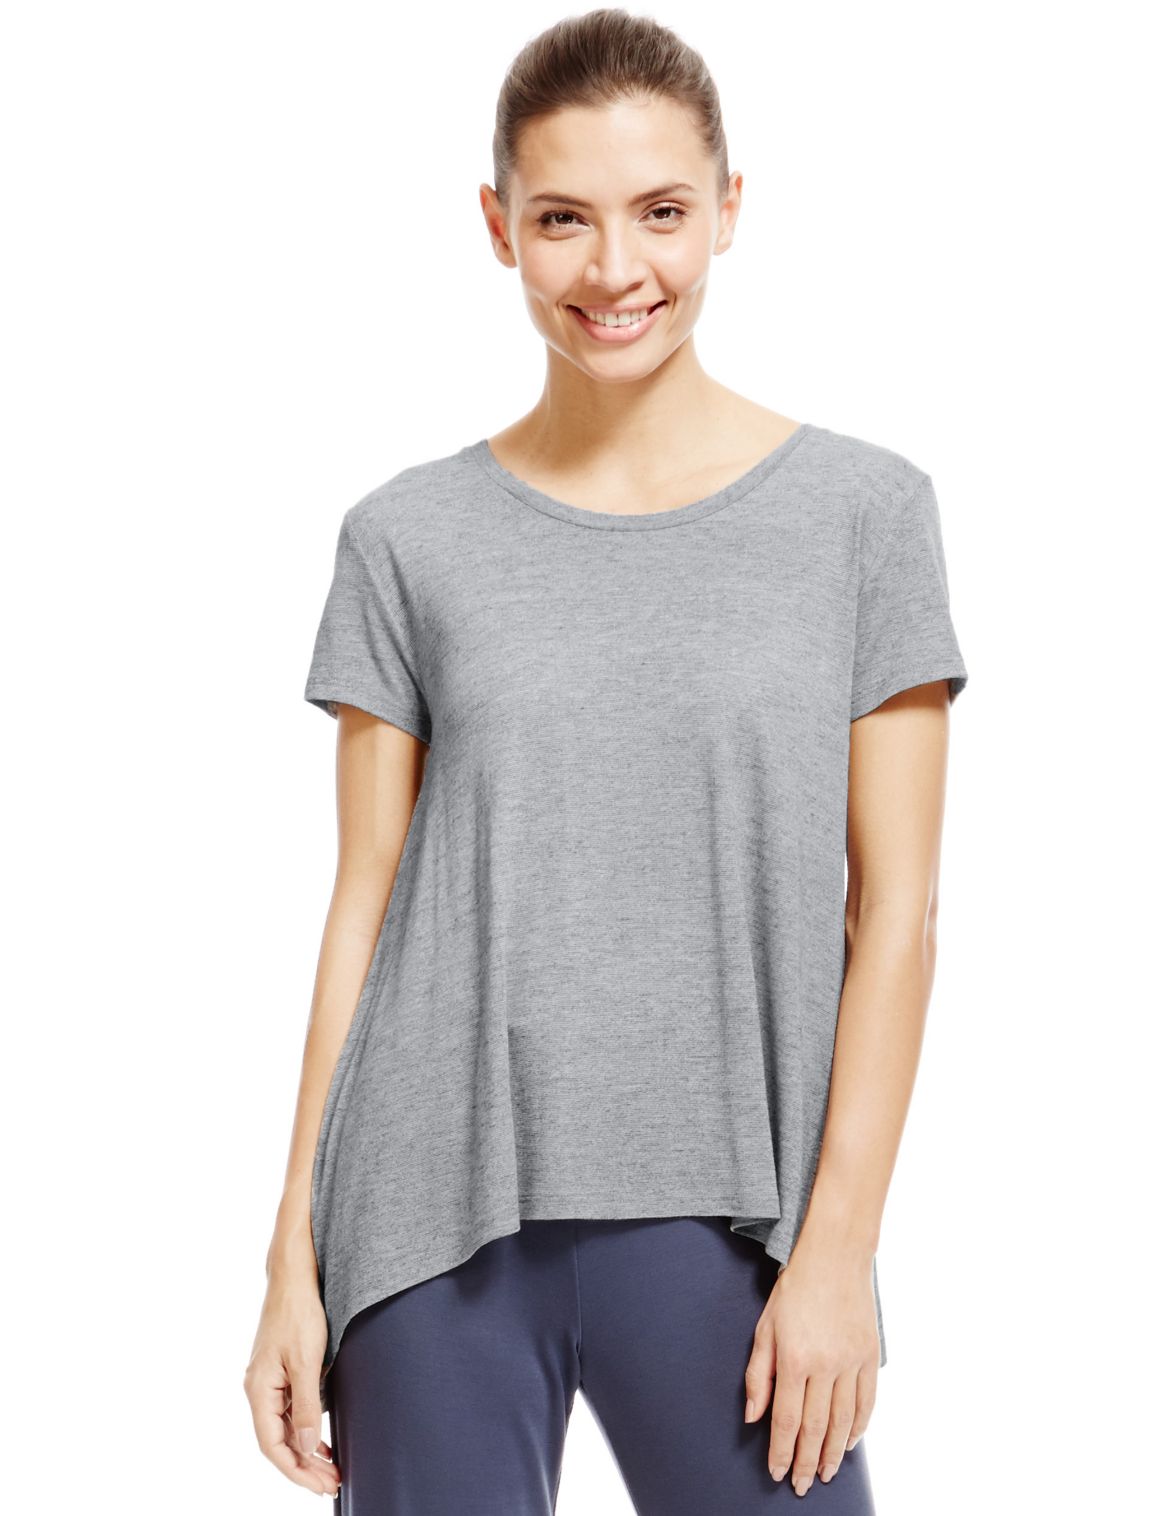 Rear Wrap T-shirt With Cool Comfortâ ¢ Technology Grey Marl | Myvee